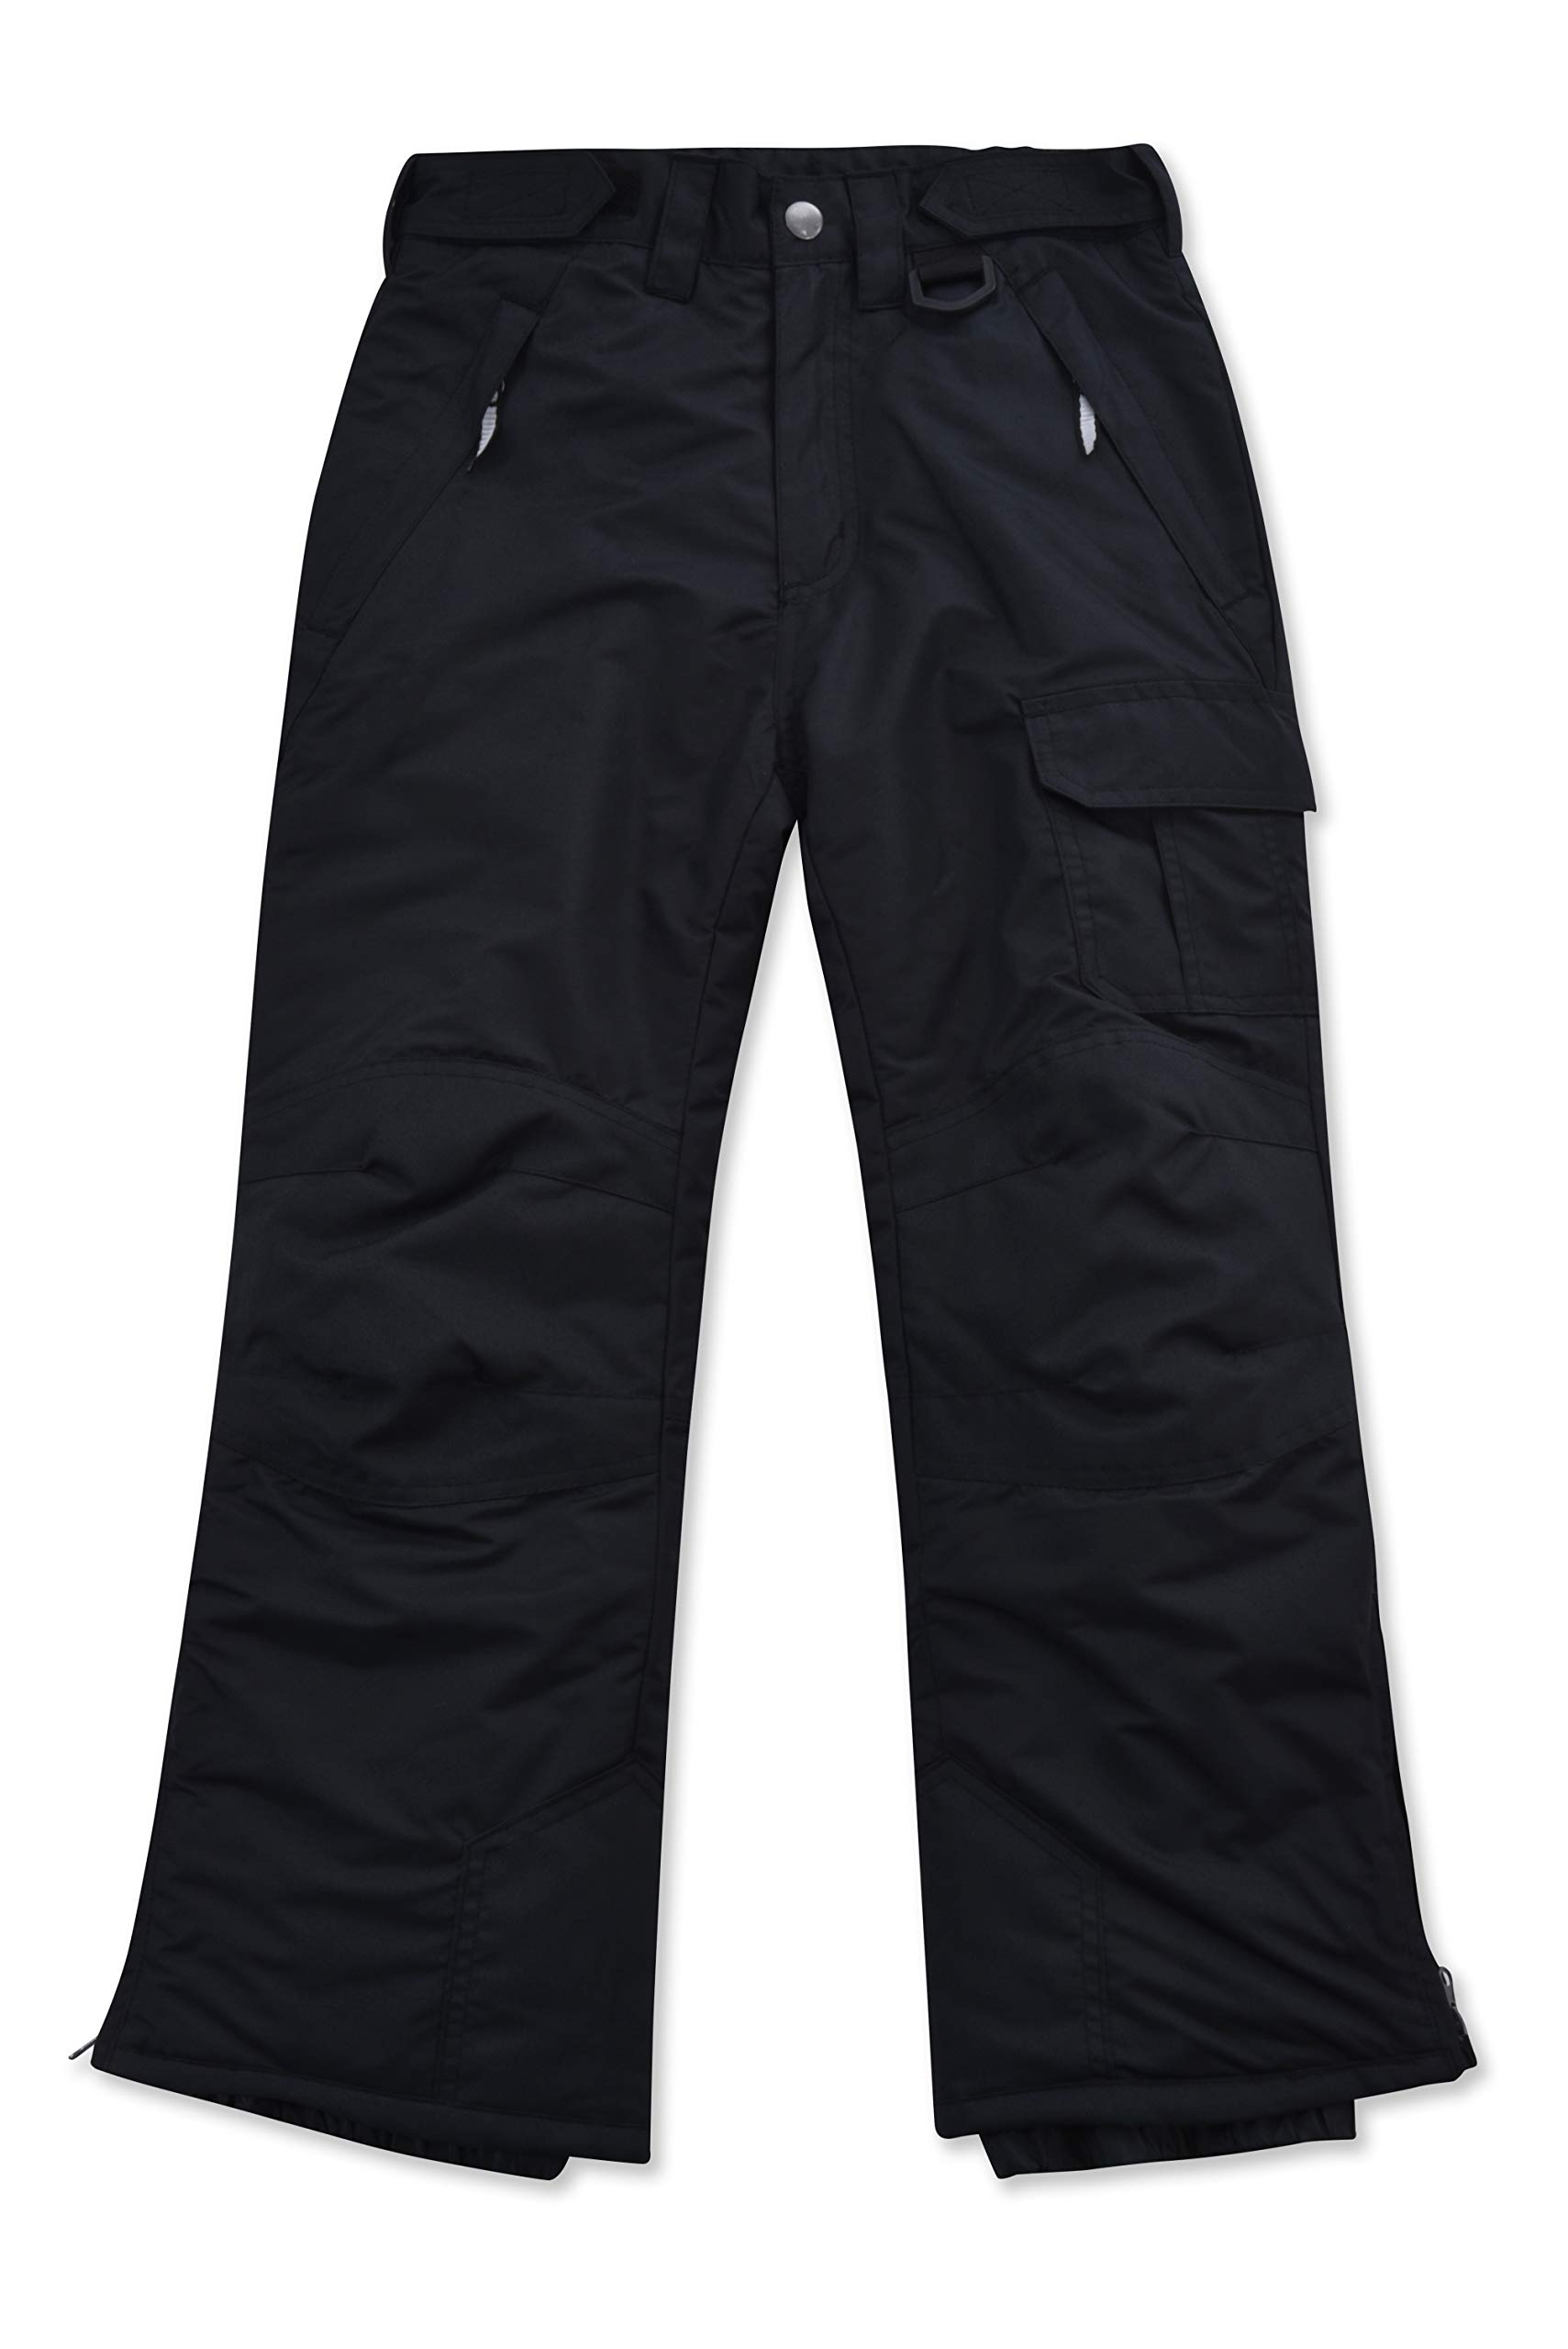 Arctic Quest Childrens Water Resistant Insulated Ski Snow Pants